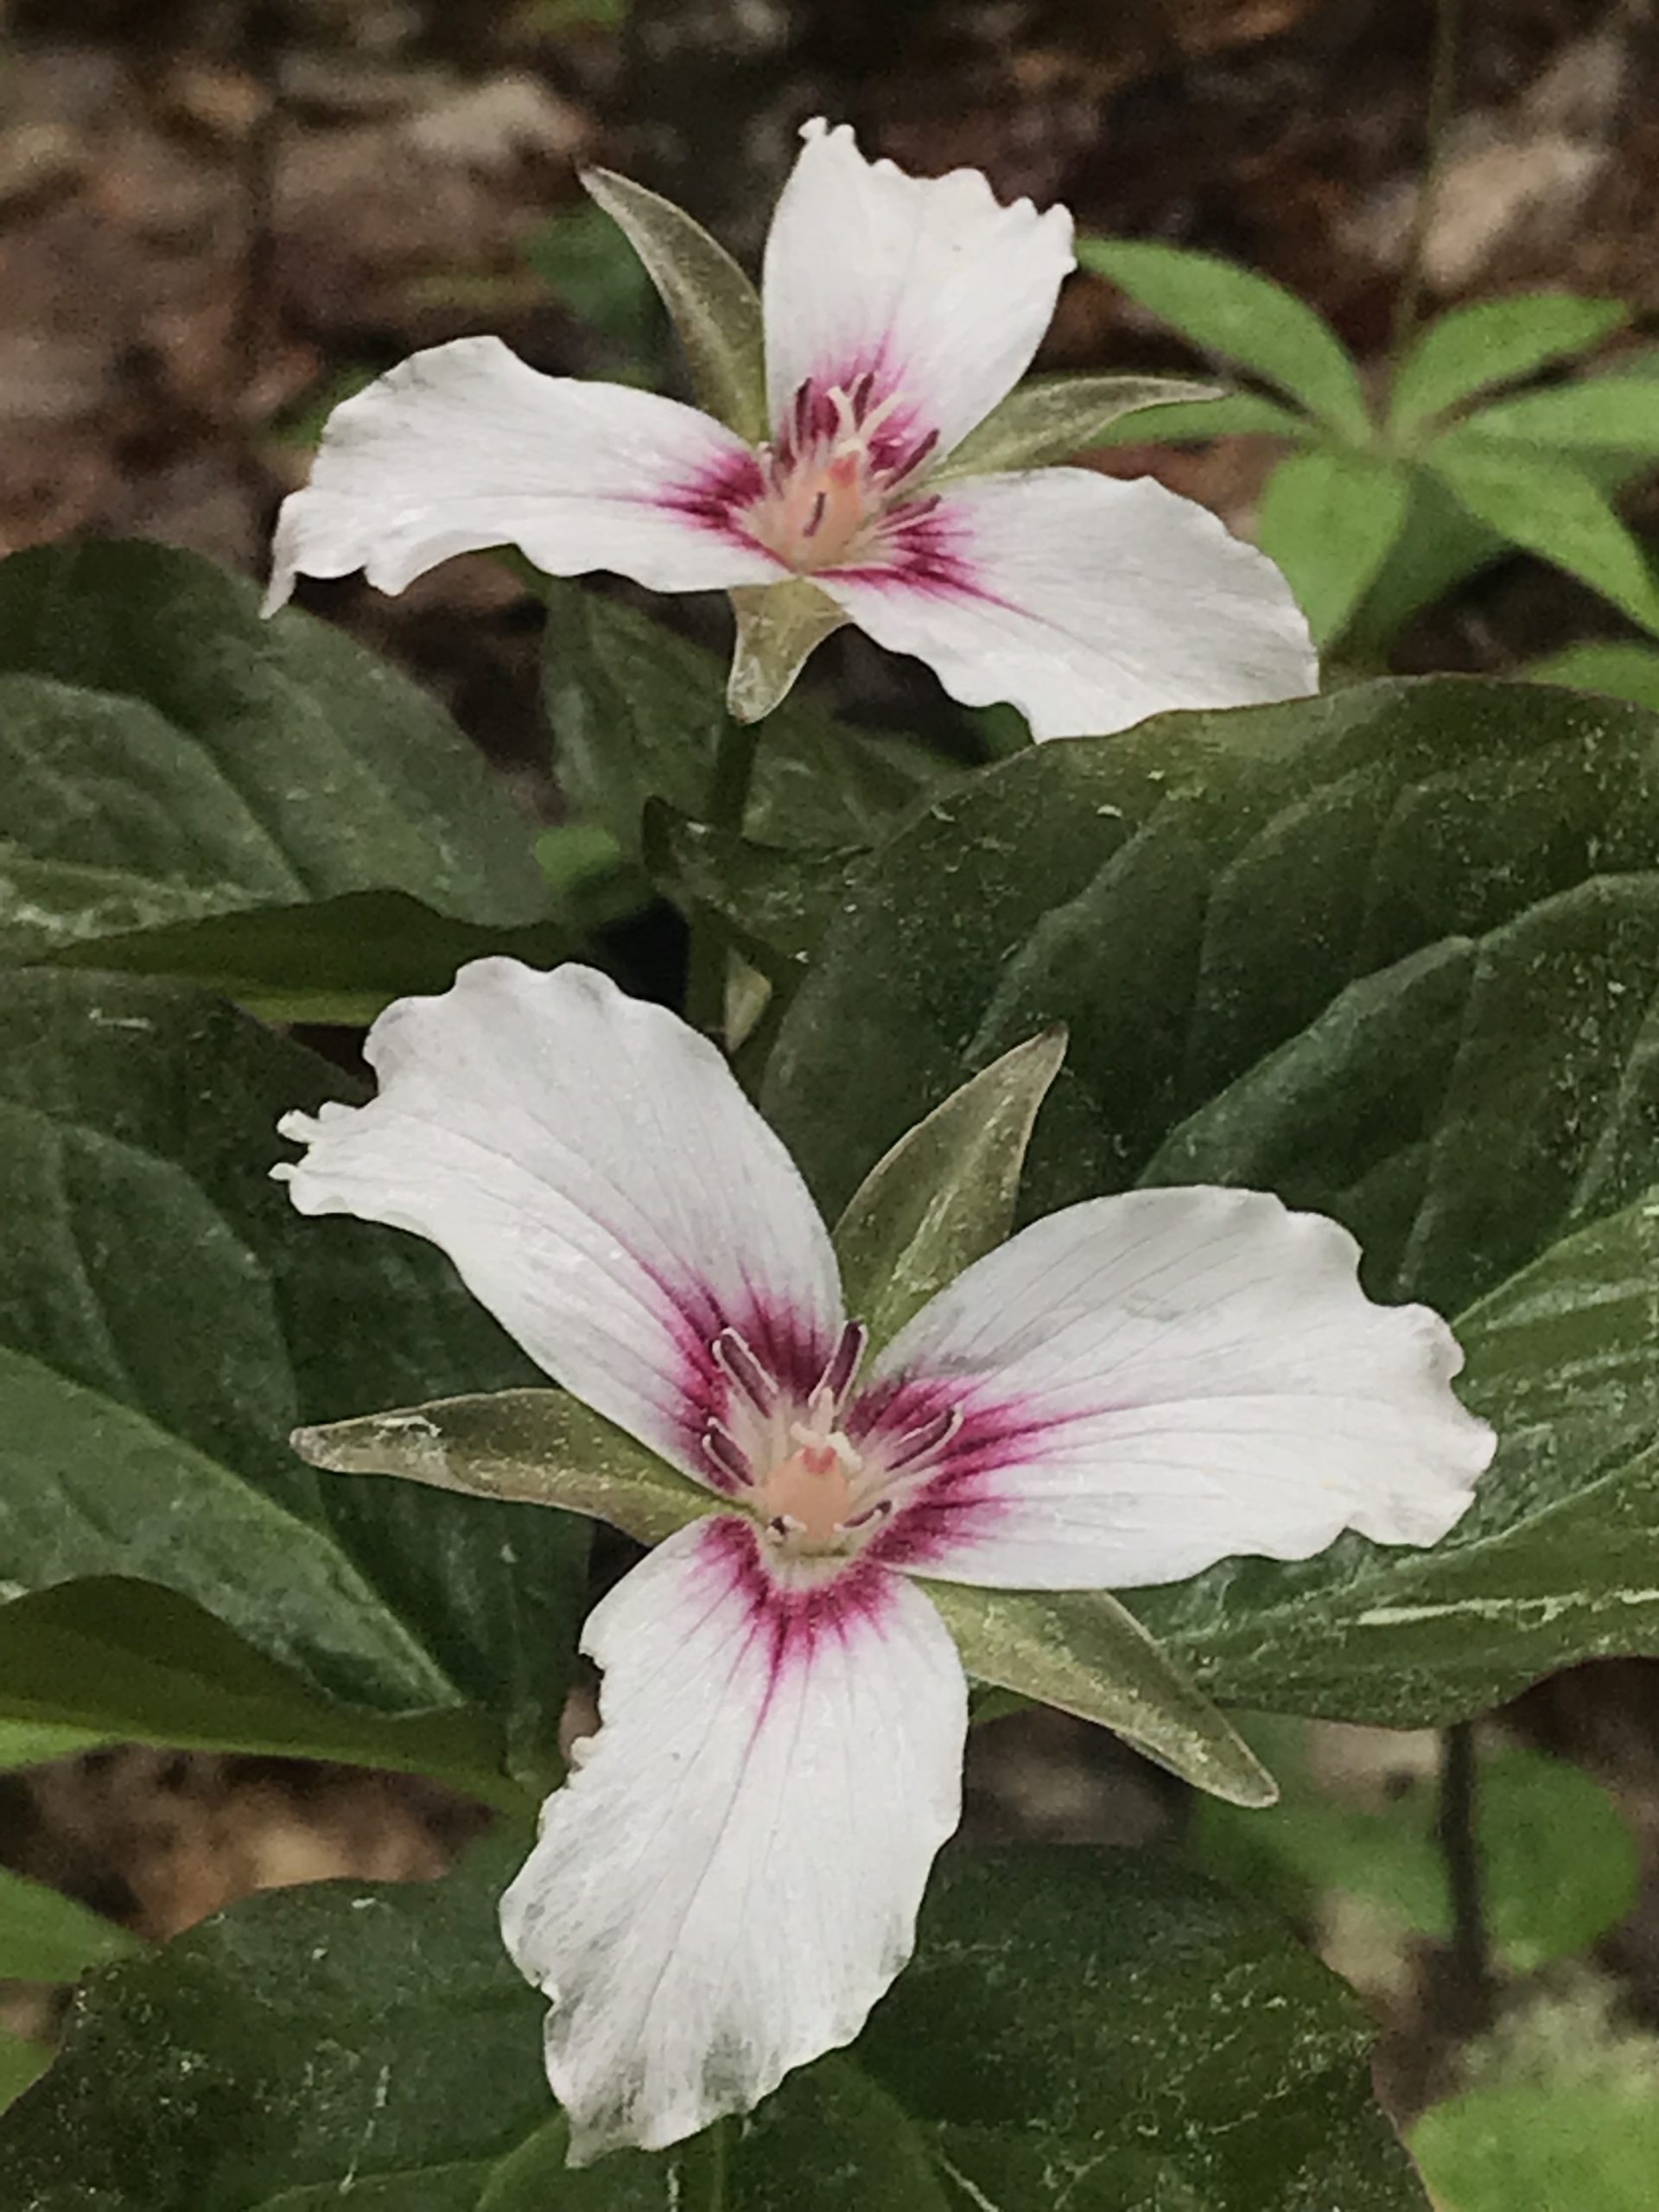 Painted trillium, or painted lady, a native Northeast flower.